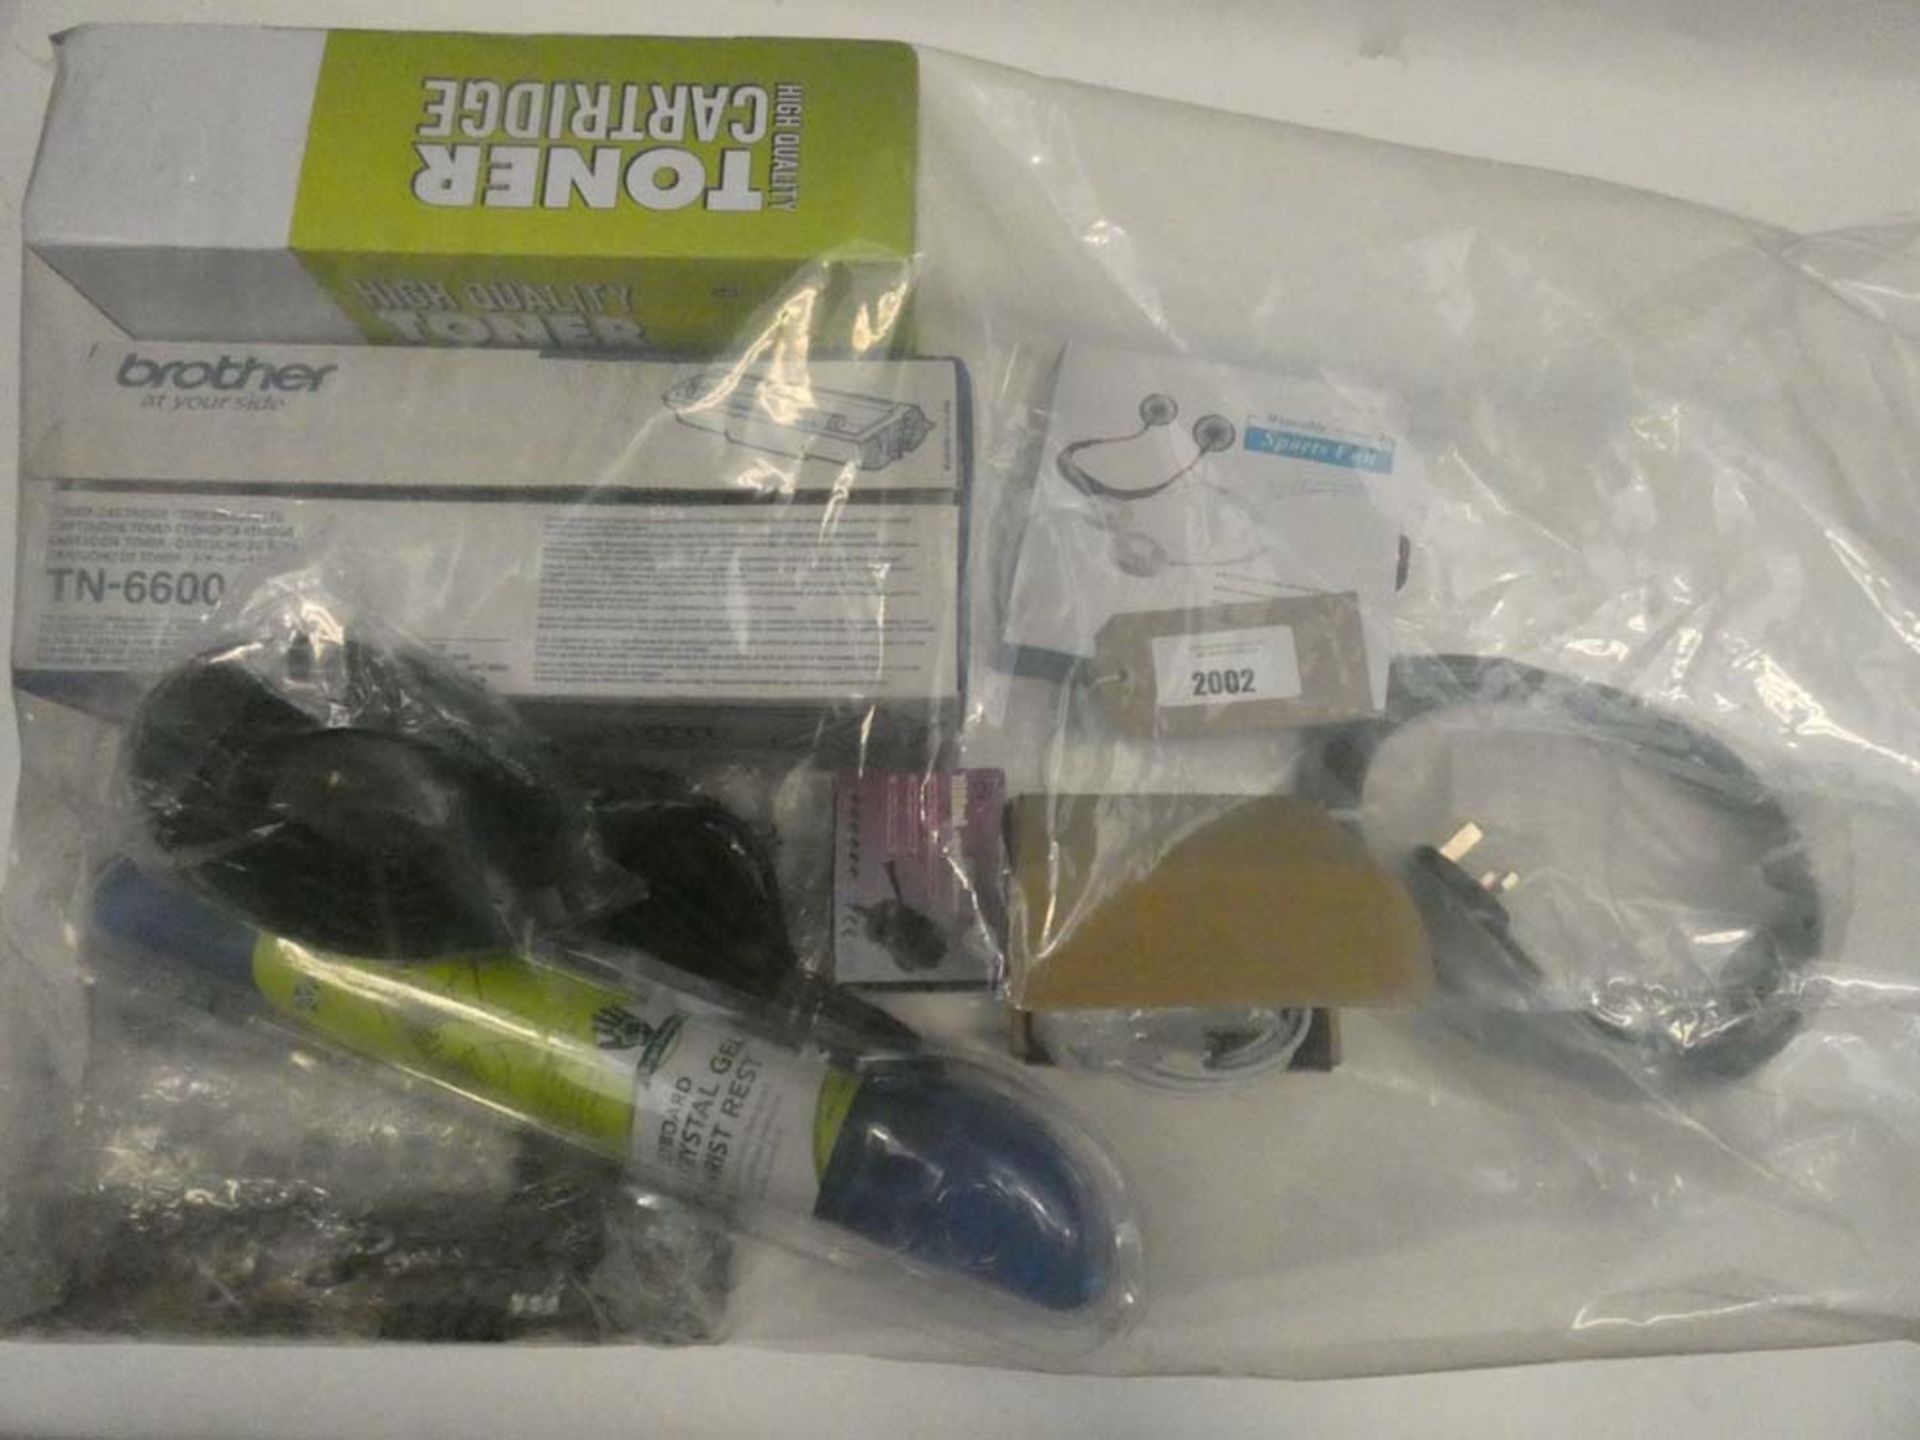 Bag containing toner cartridges and miscellaneous electrical related accessories